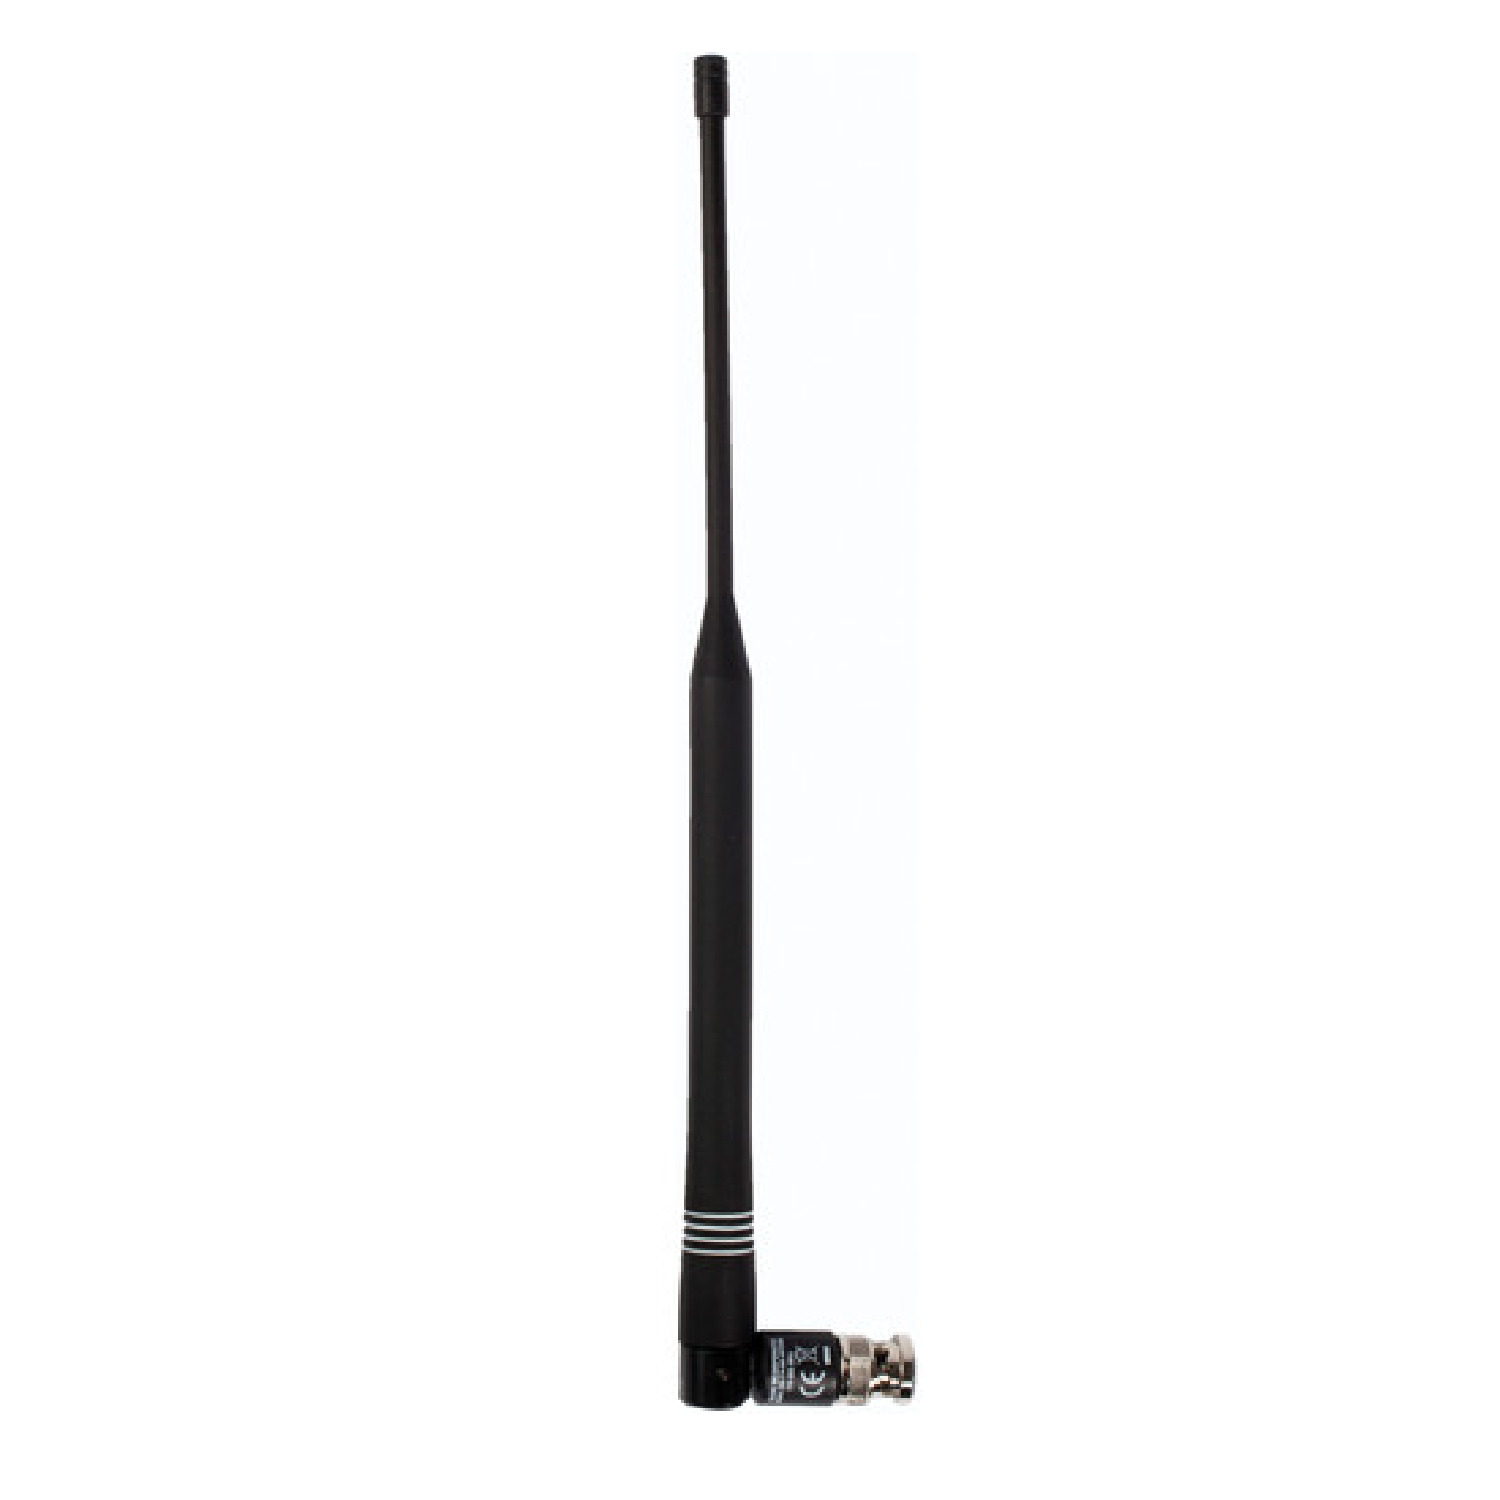 ½ Wave Omnidirectional Receiver Antenna for Axient, UHF-R, ULX-D, ULX, SLX and BLX4R Receivers and PSM1000 and PSM900 Transmitters   UA8 shure